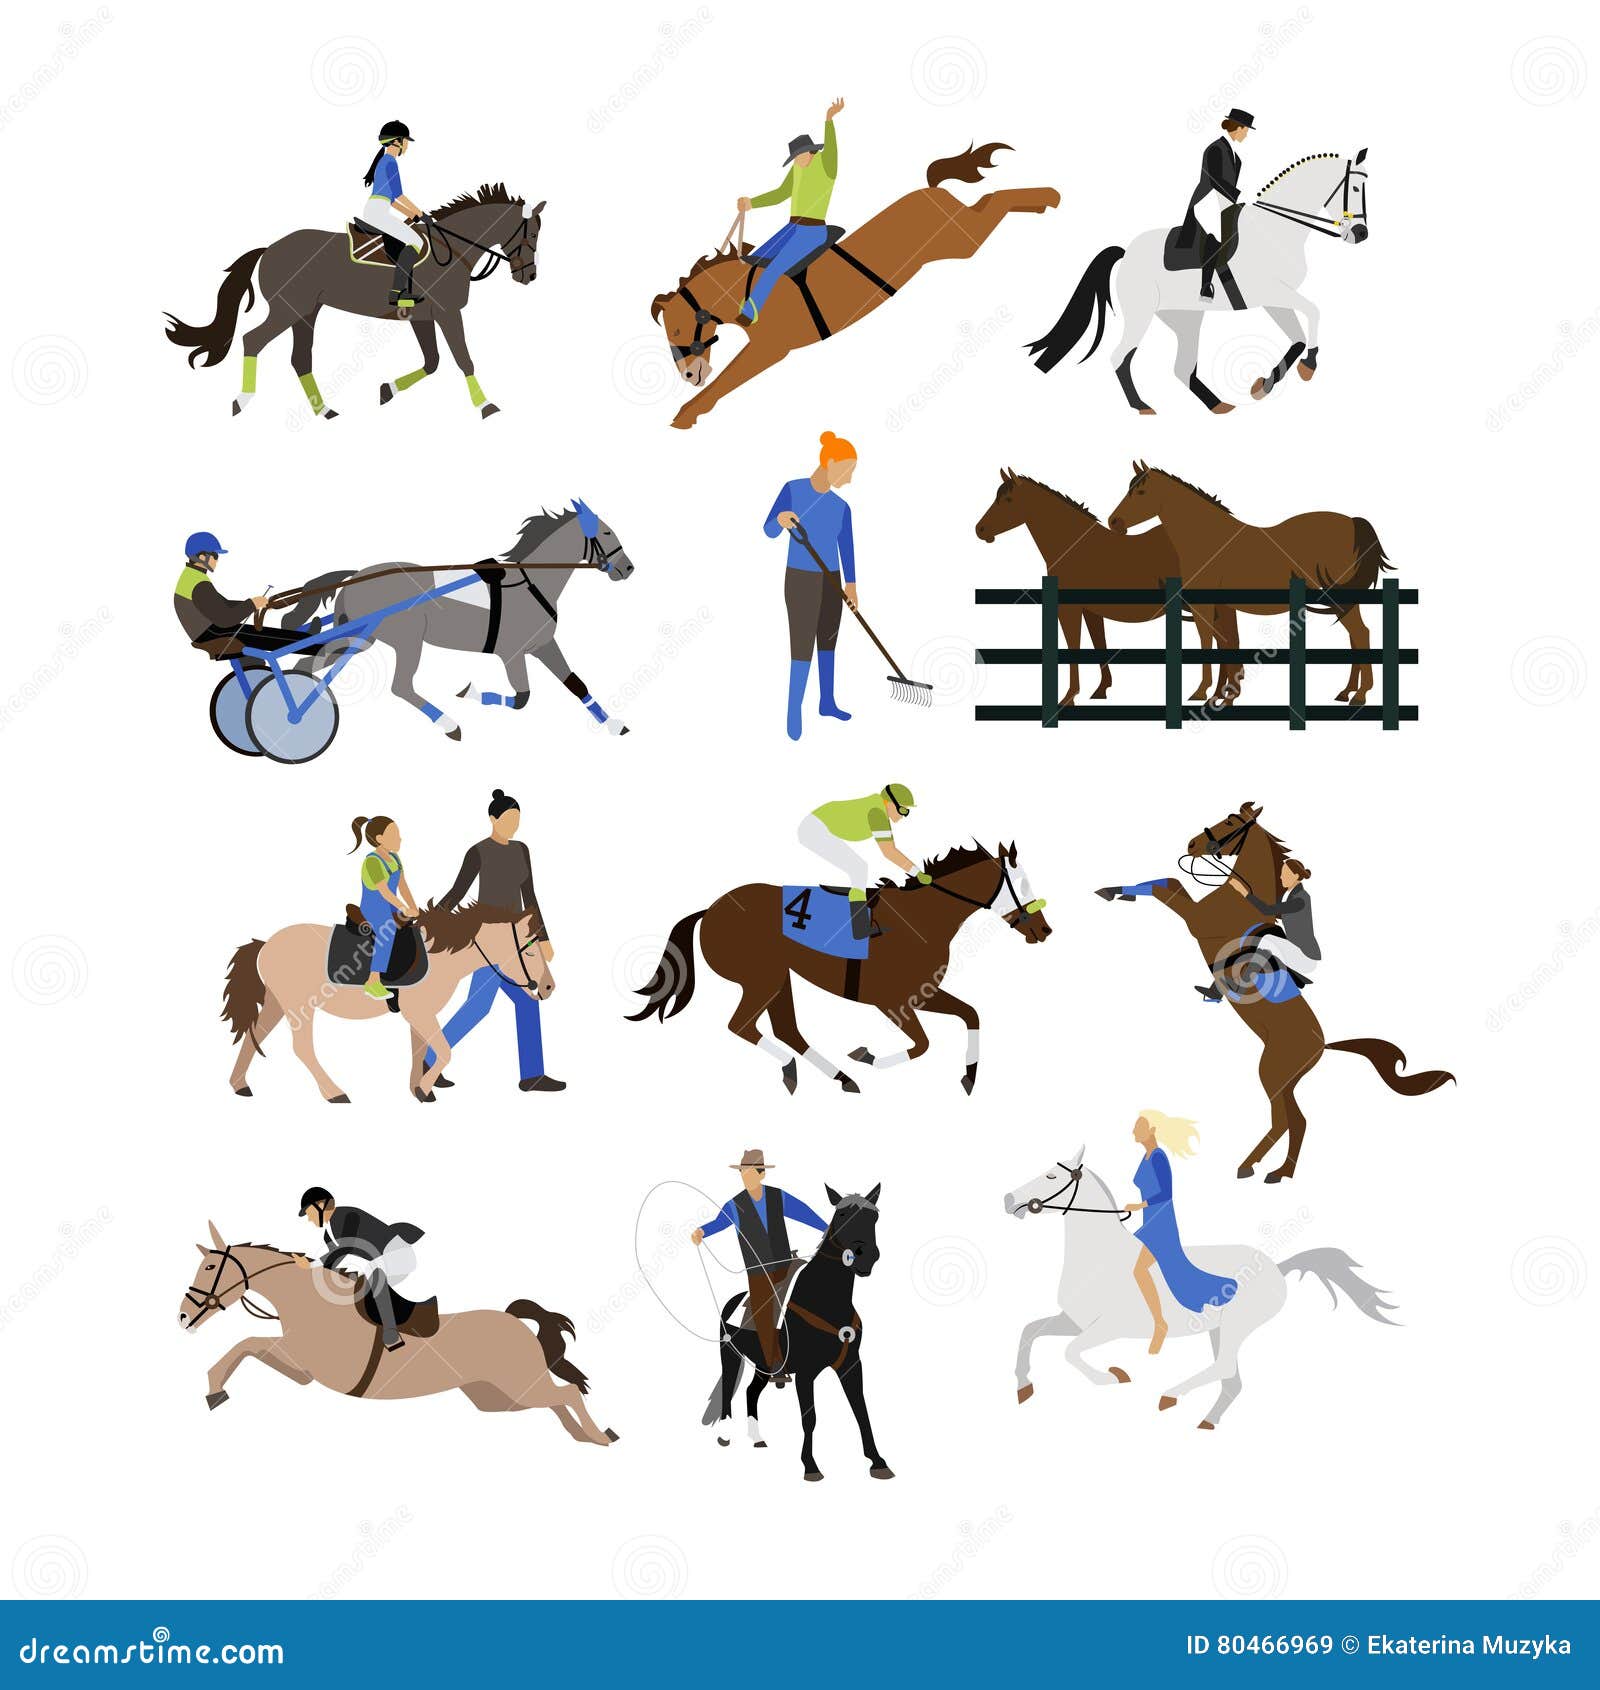  set of horse riders icons, flat 